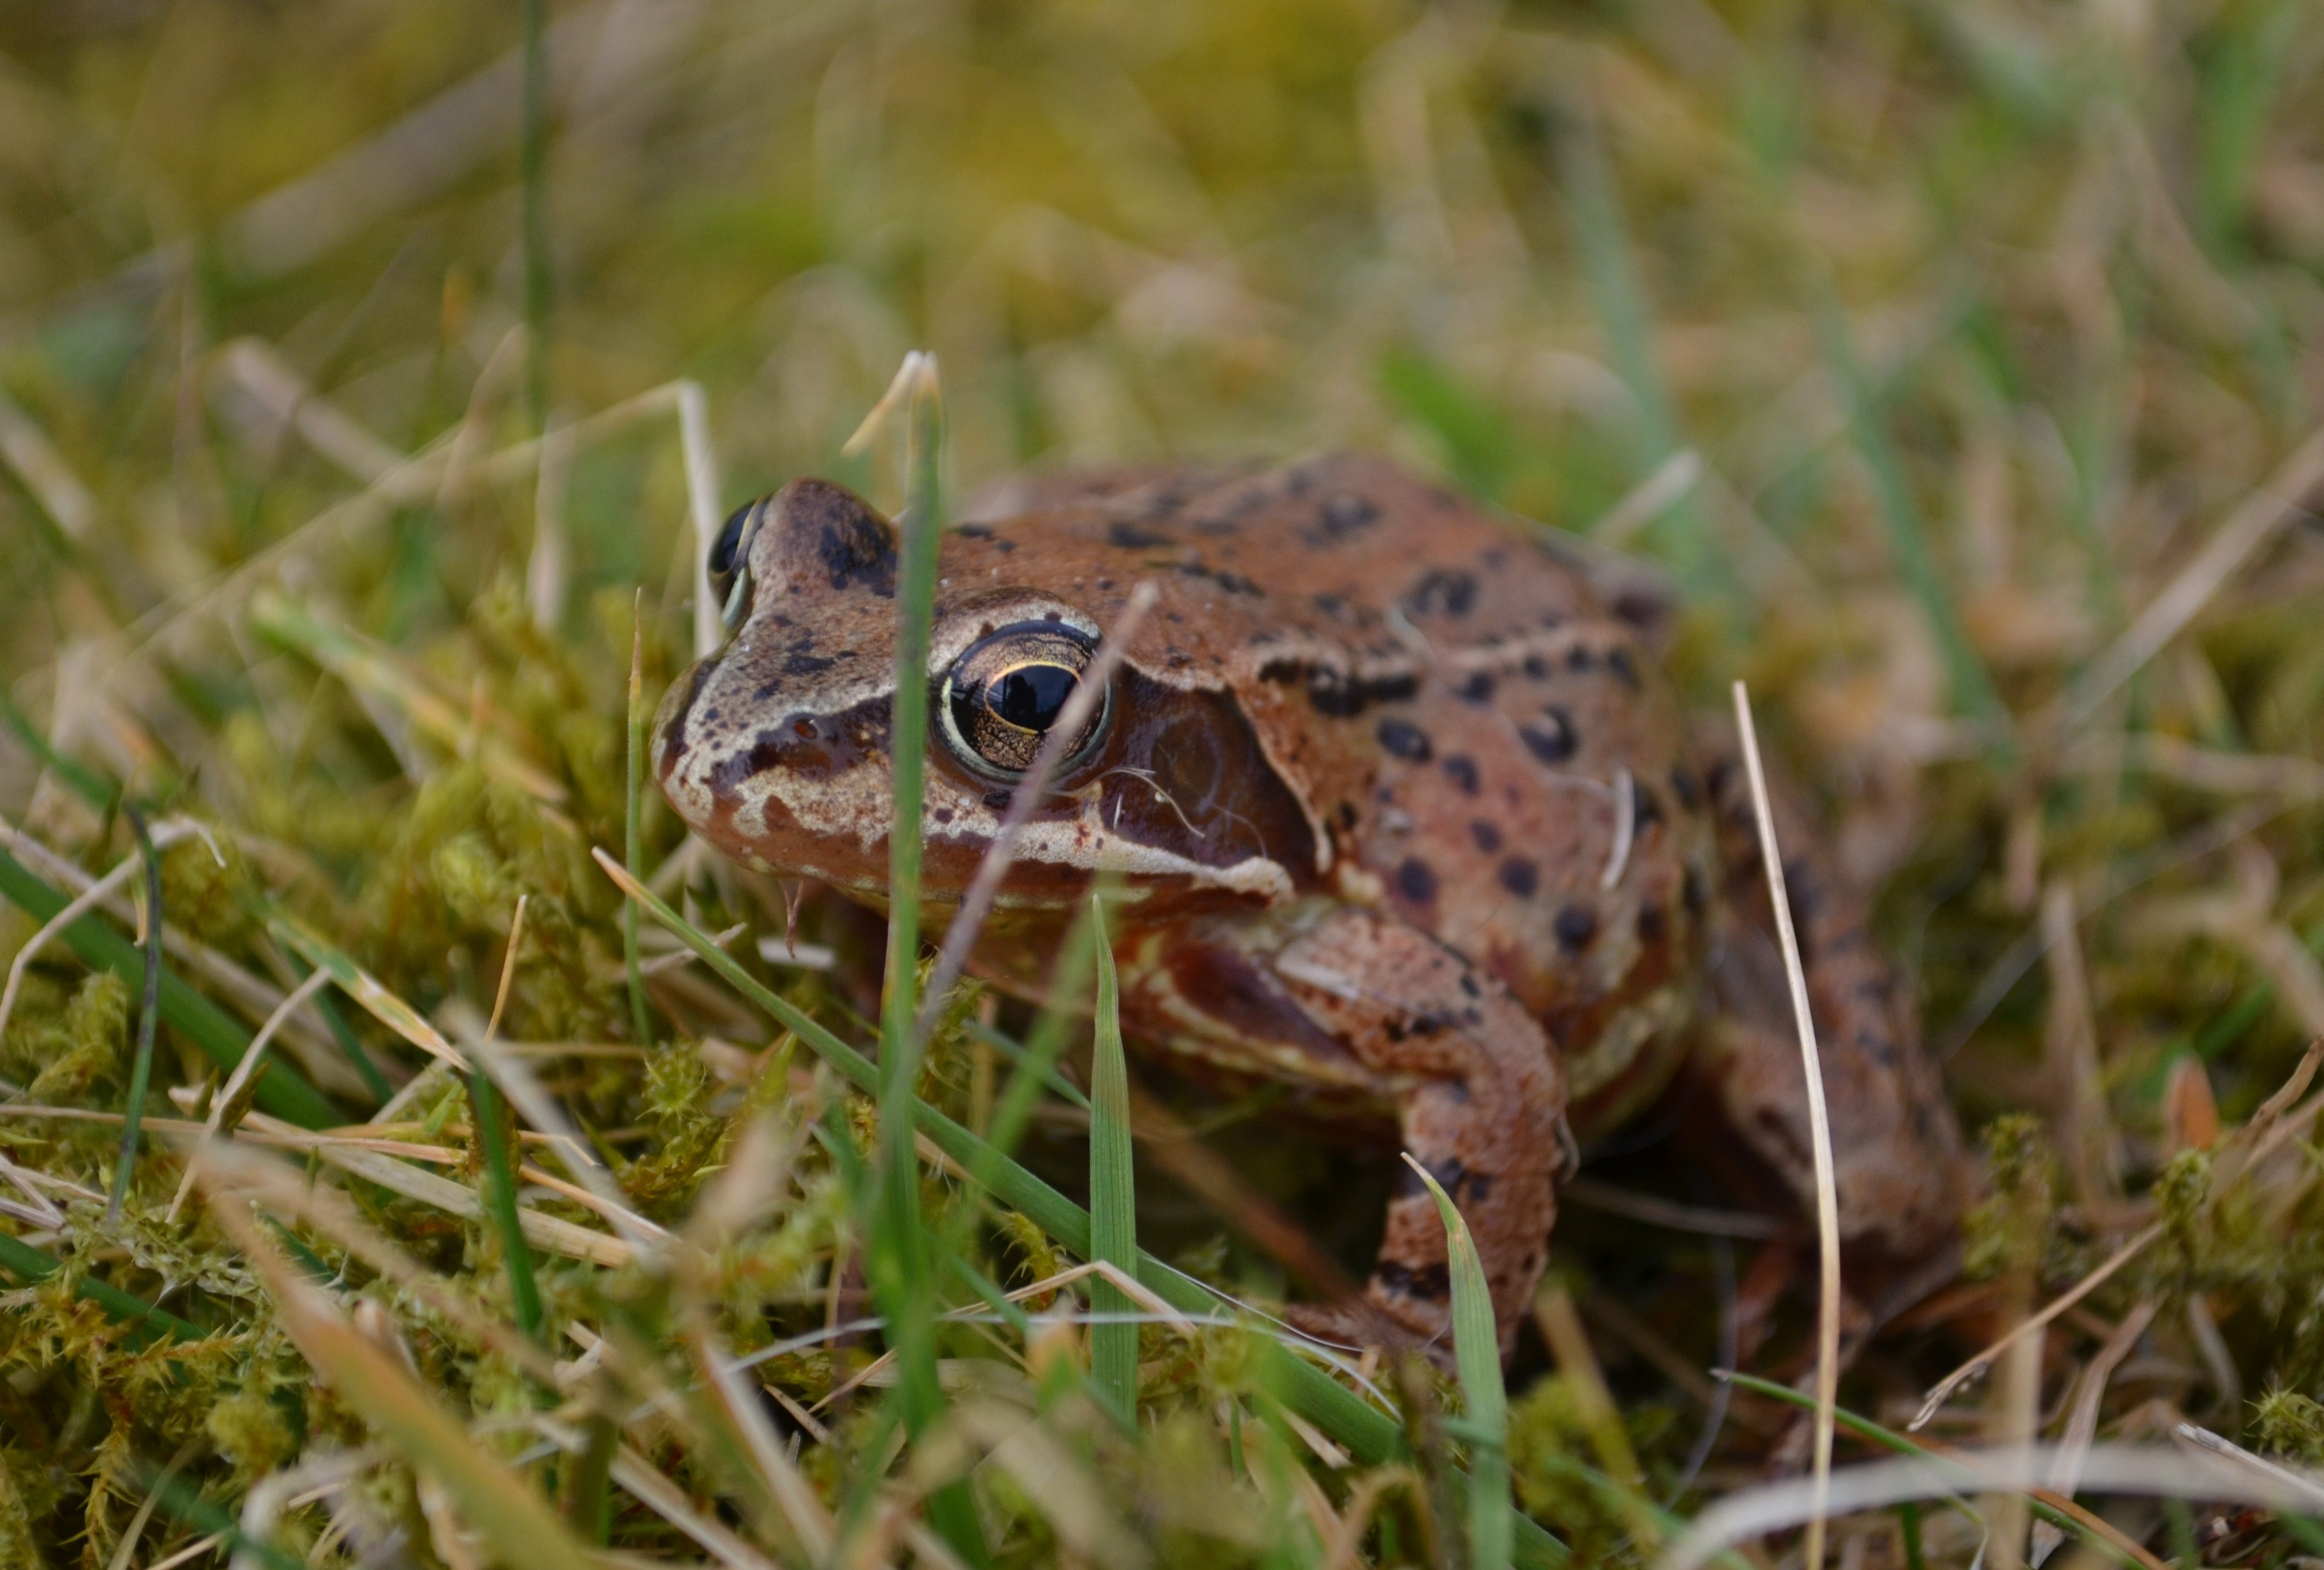 brown and black toad